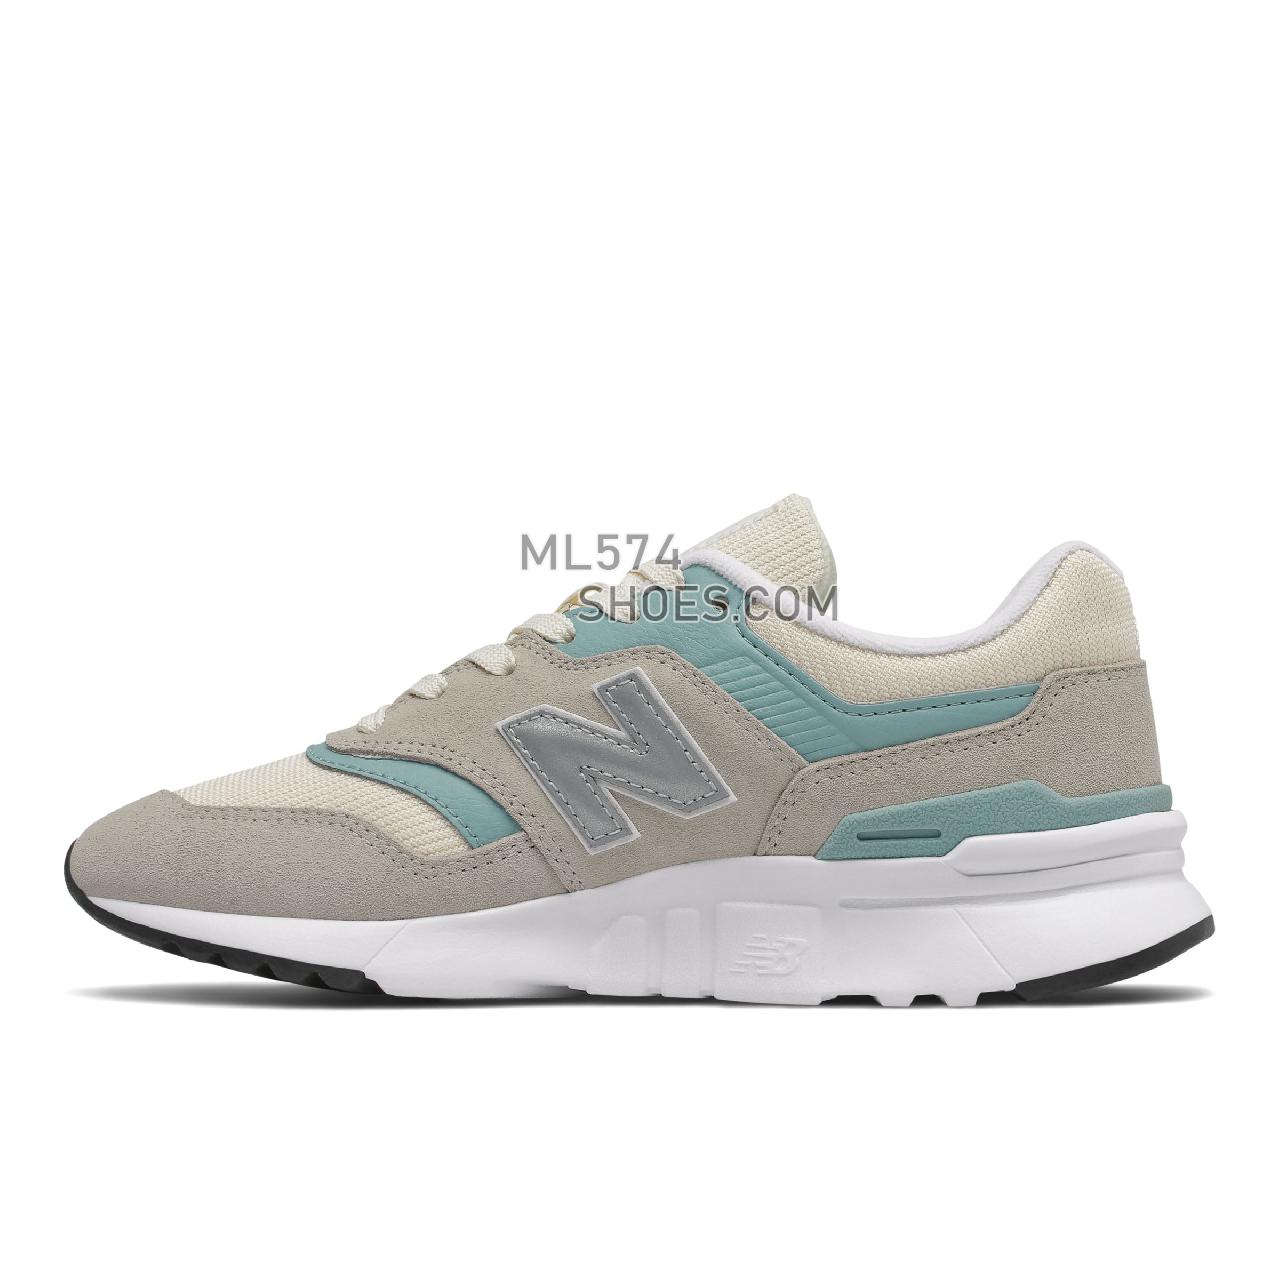 New Balance 997H - Women's Classic Sneakers - Tan with White - CW997HTL